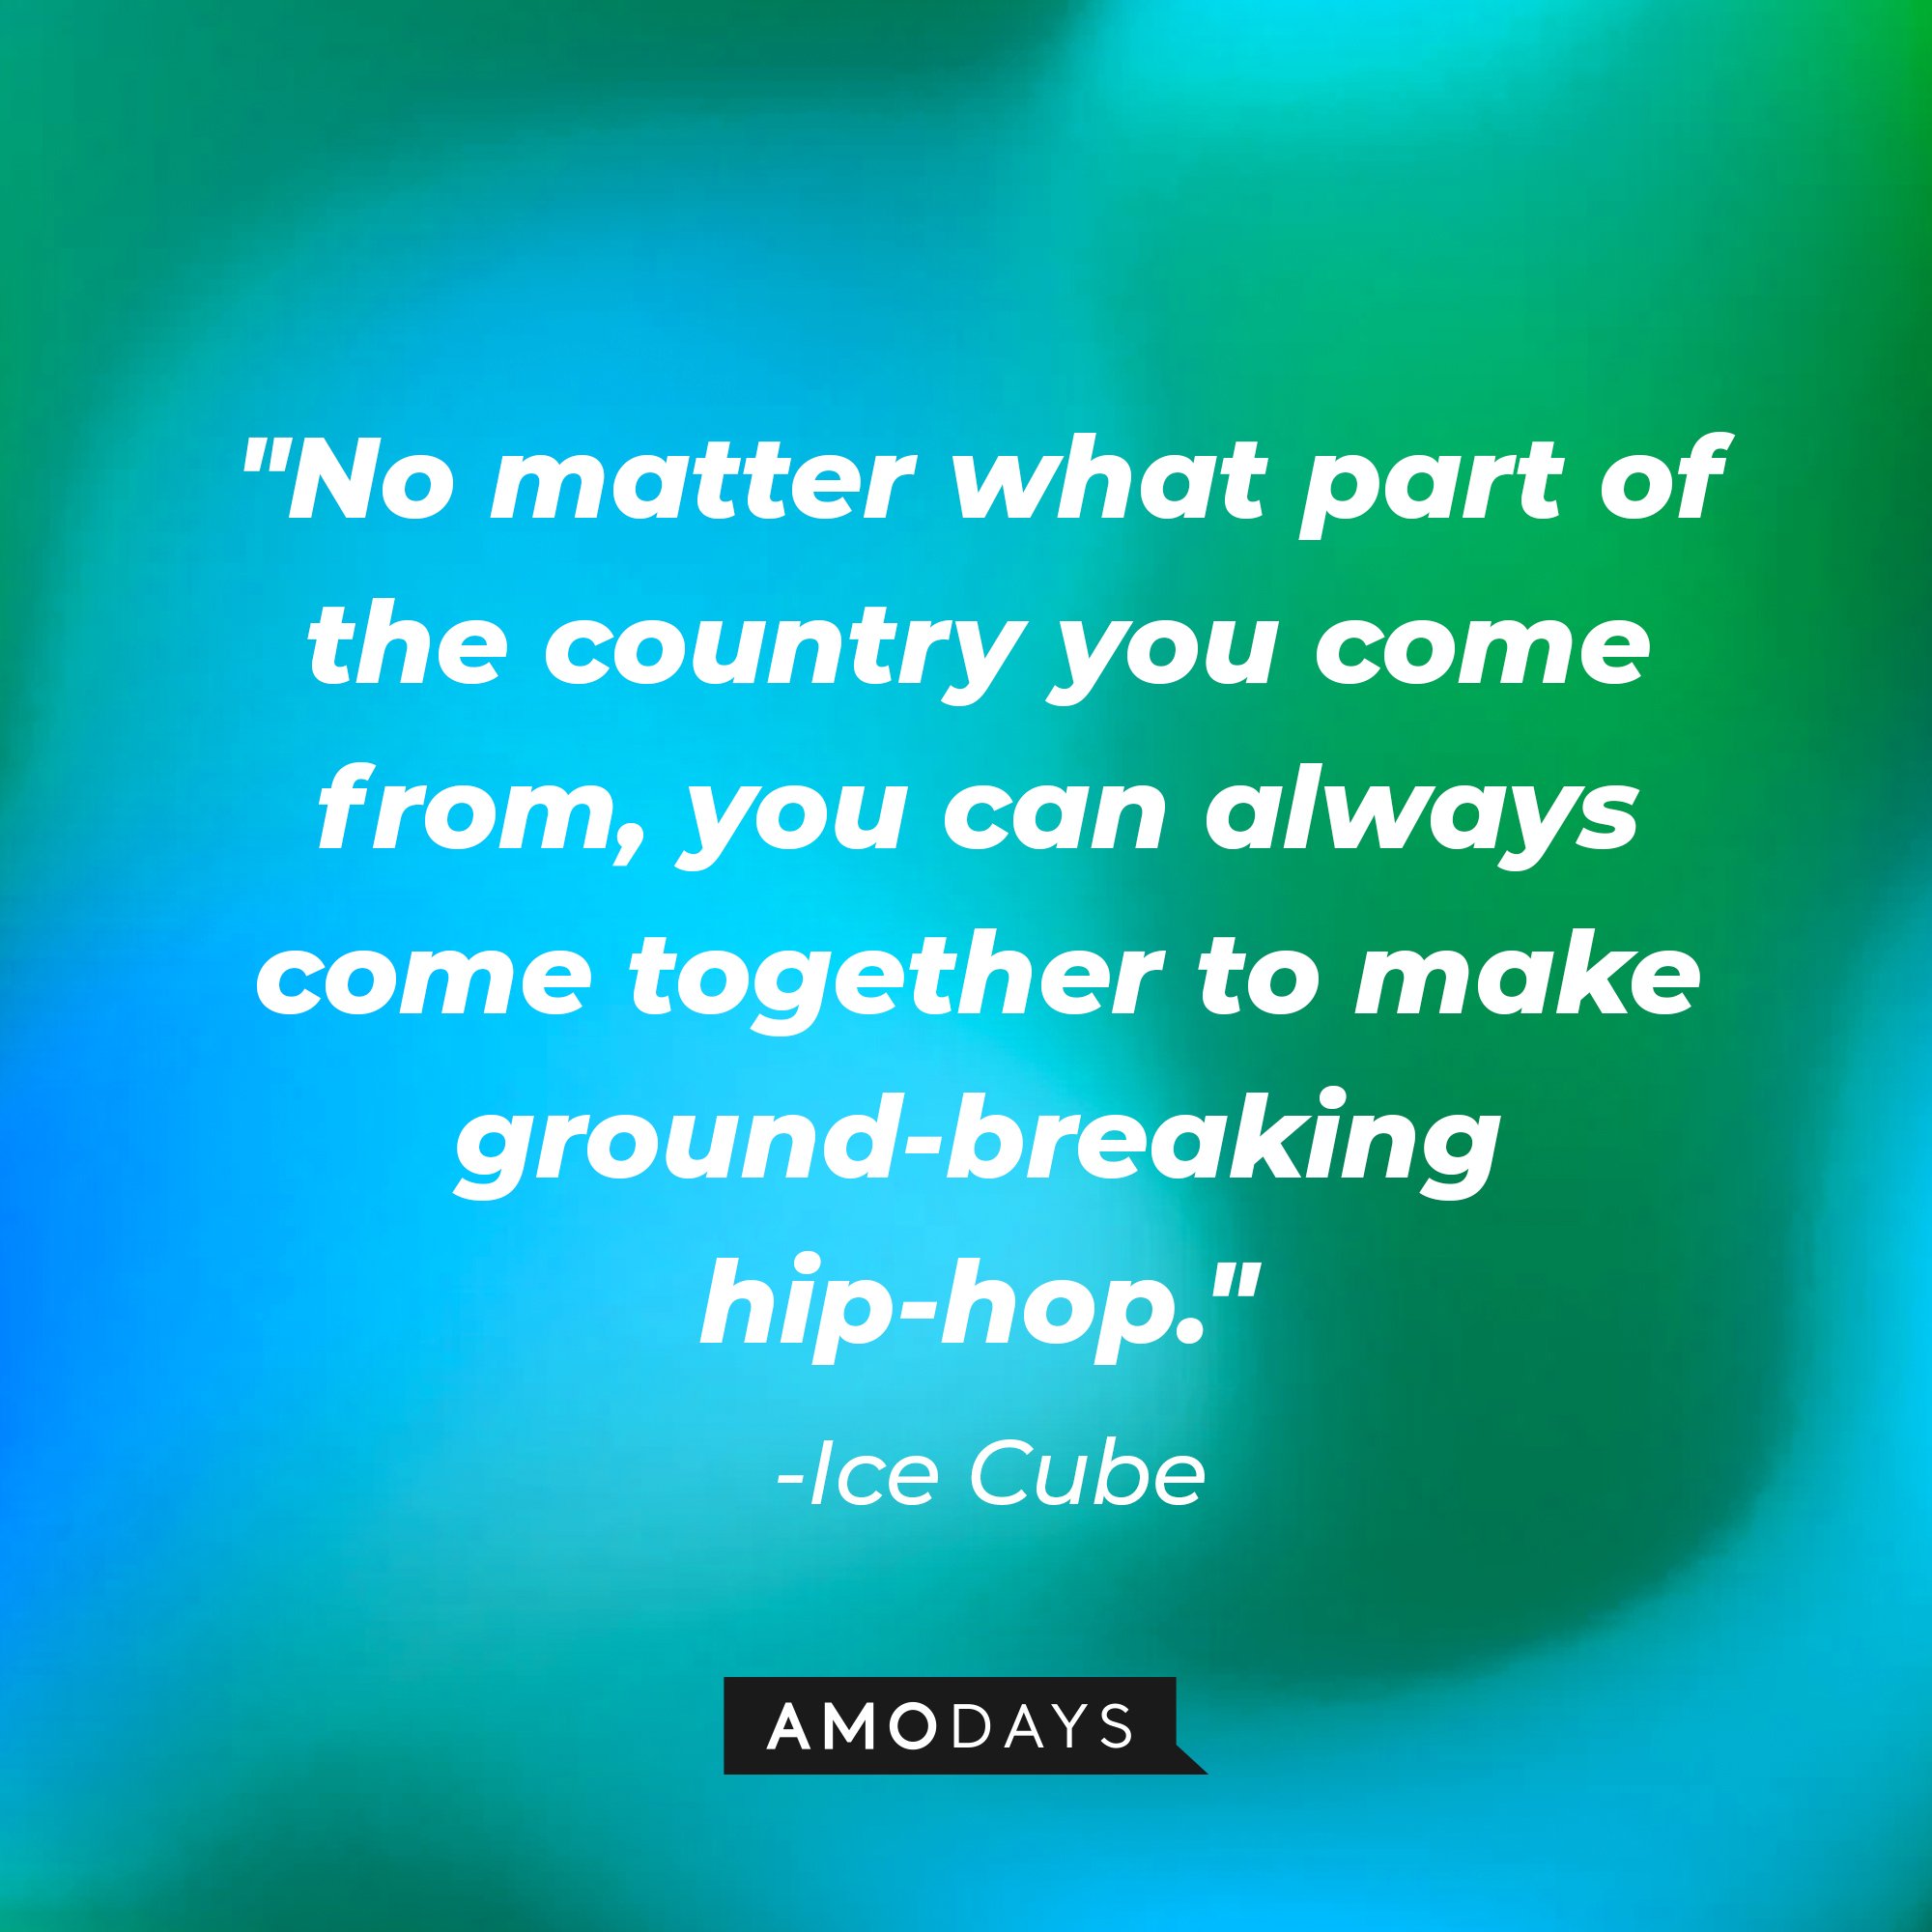 Ice Cube's quote: "No matter what part of the country you come from, you can always come together to make ground-breaking hip-hop." — Ice Cube | Image: AmoDays